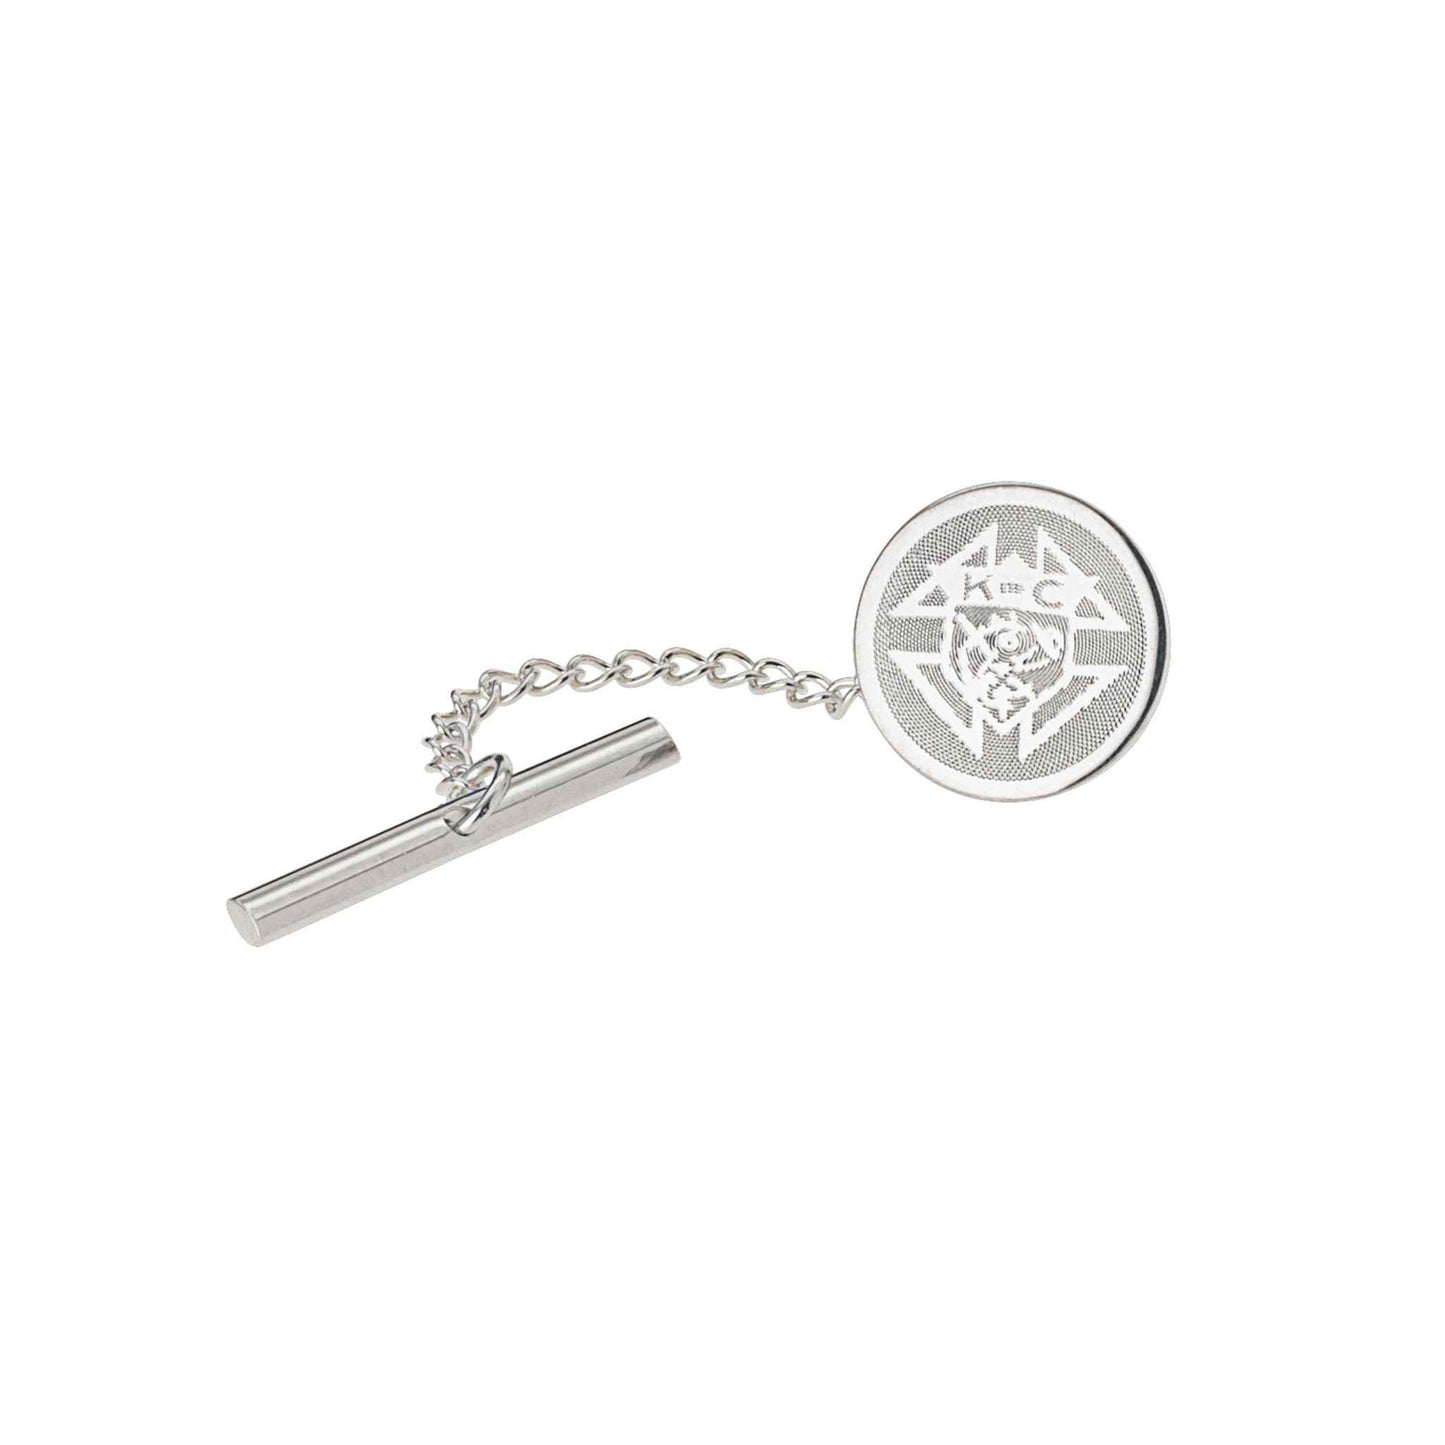 A emblem tie tack displayed on a neutral white background.